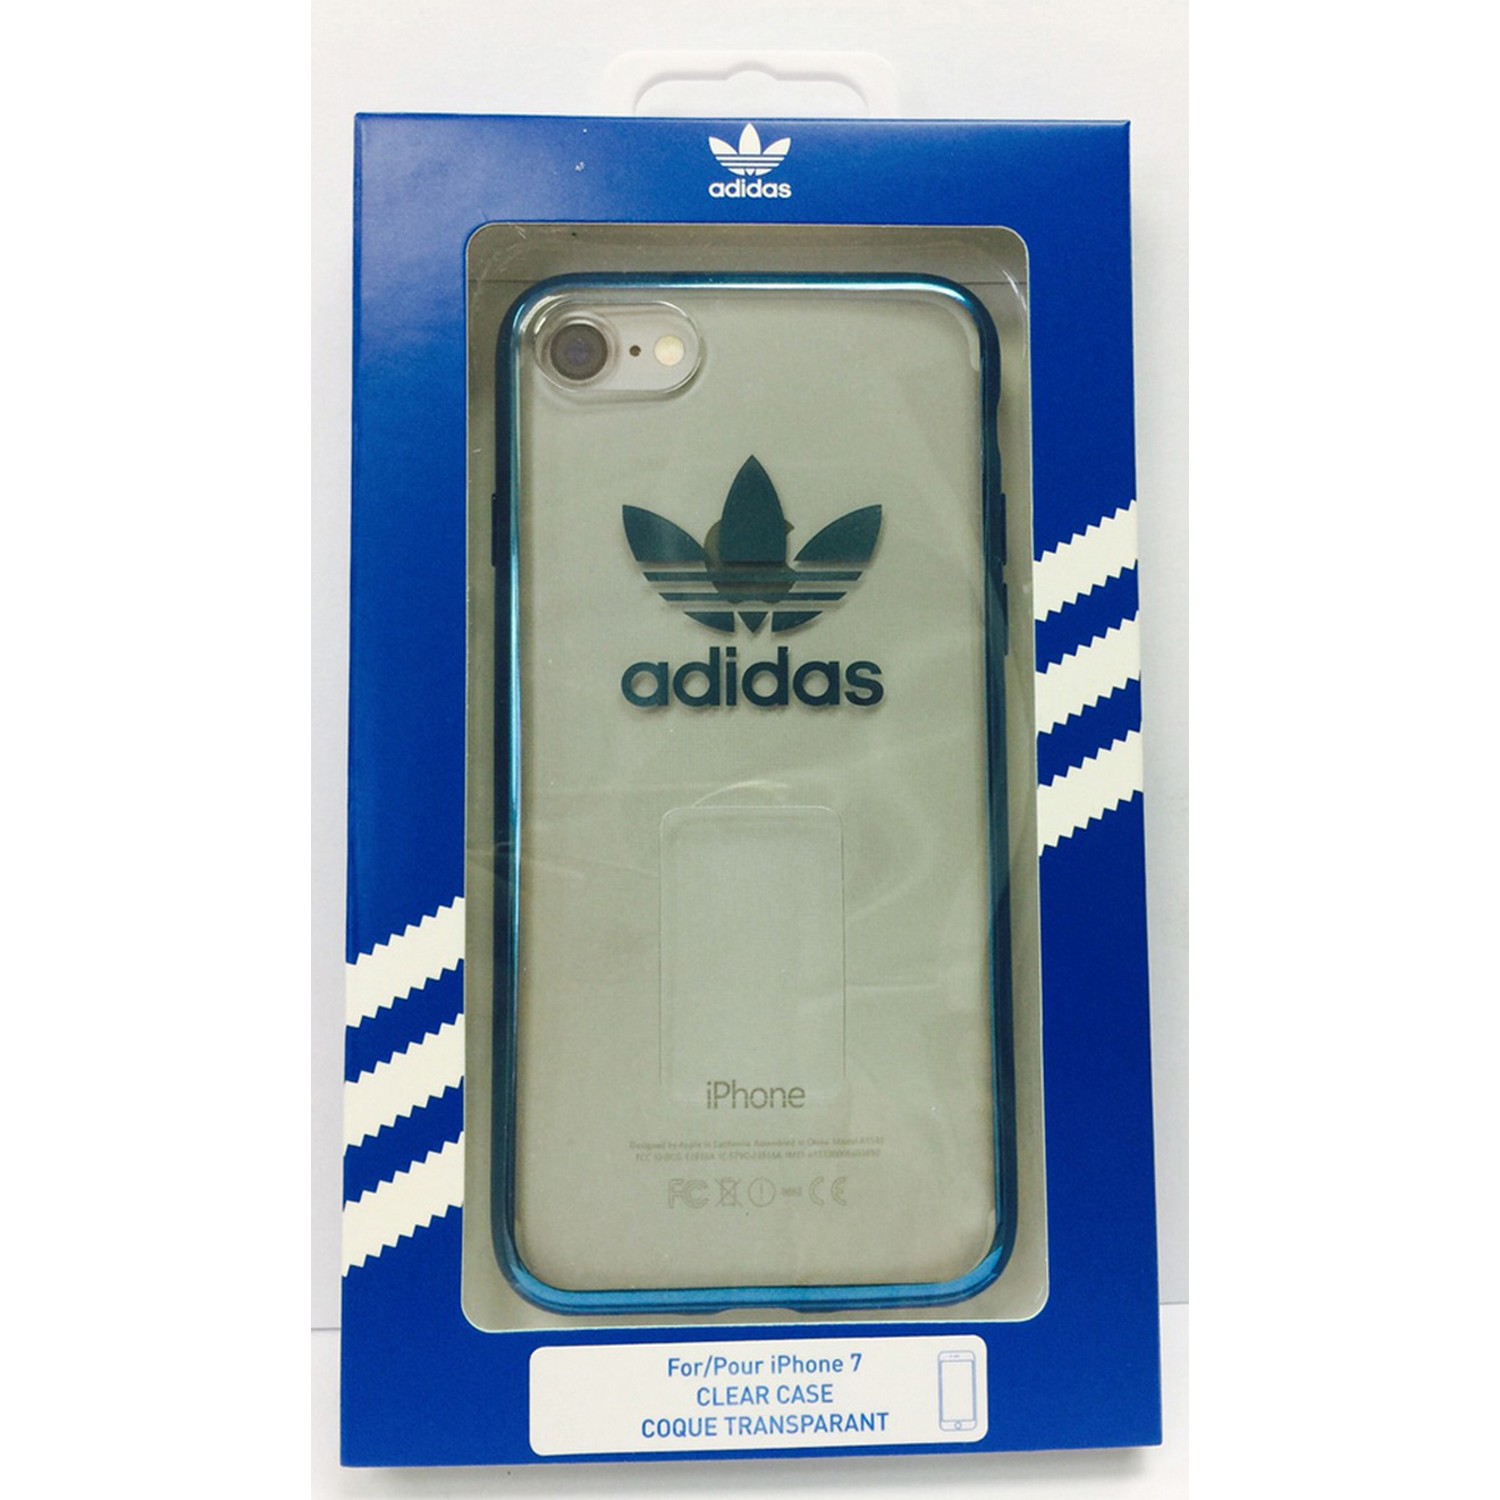 ADIDAS Case for iPhone 7 Clear Blue Metallic Logo